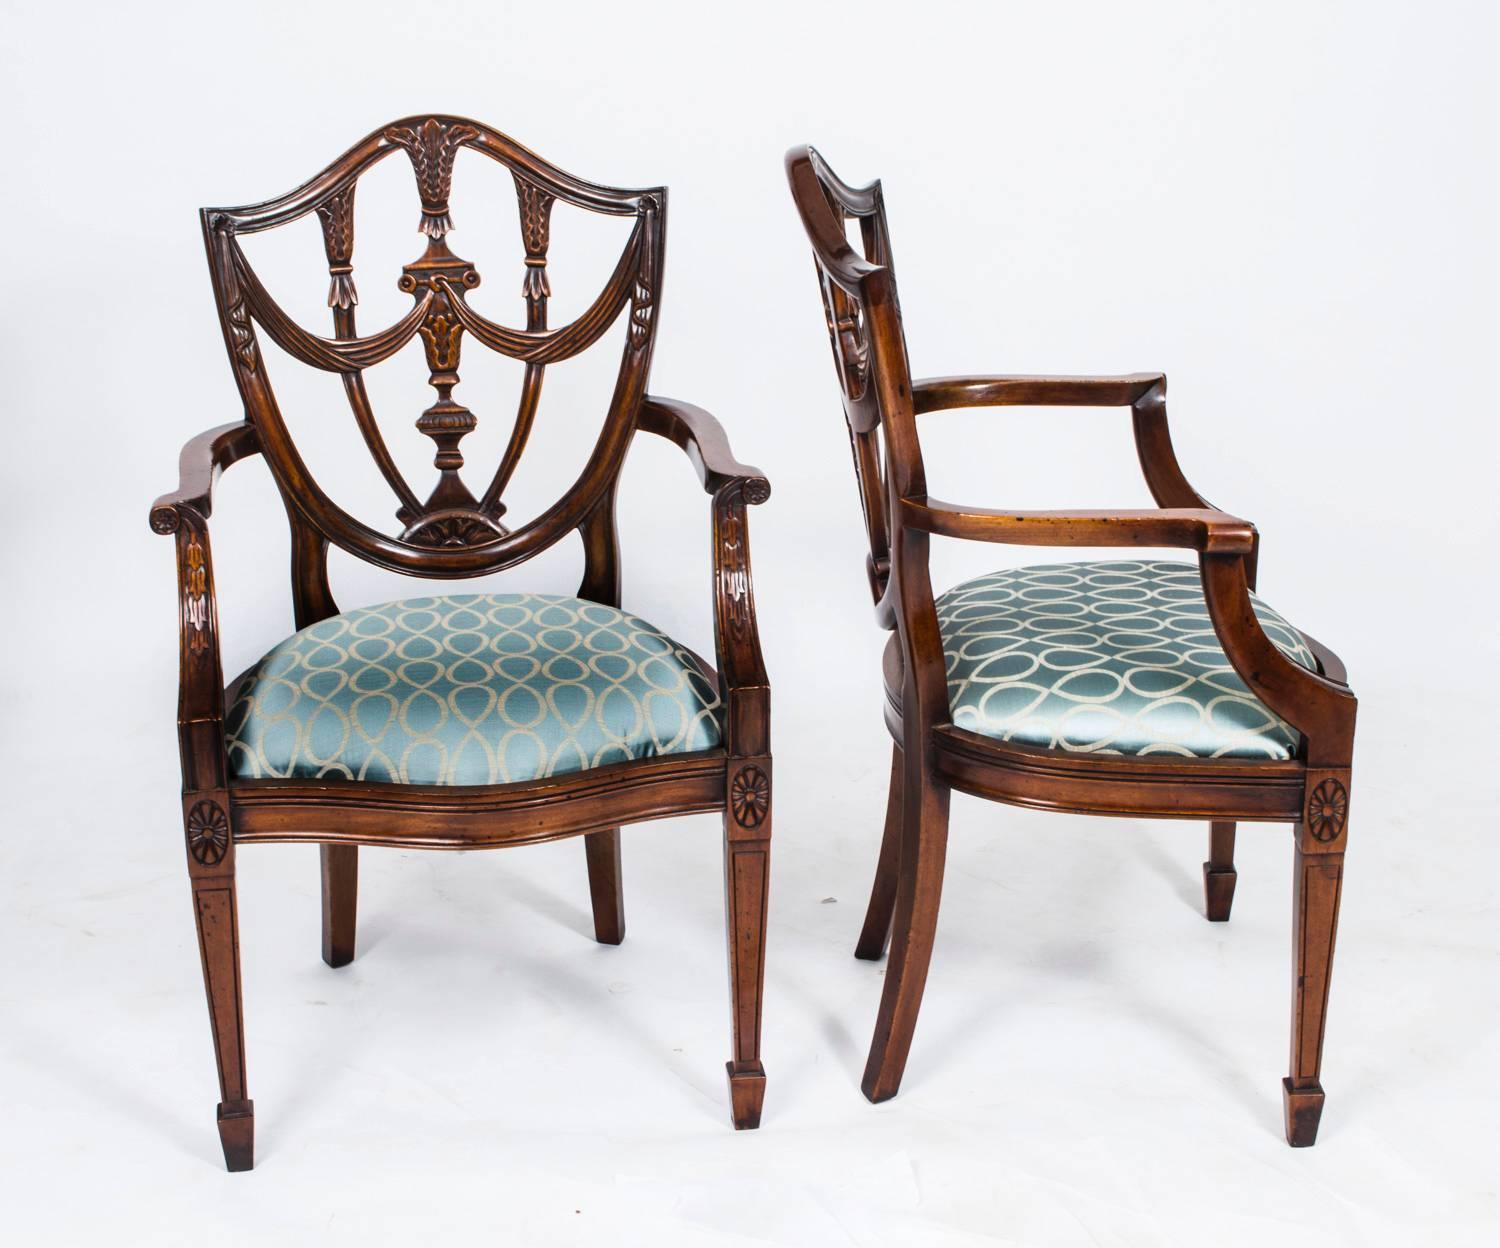 This is an absolutely fantastic vintage set of fourteen Federal style shield back dining chairs, dating from the second half of the 20th century.

These chairs have been masterfully crafted in beautiful solid mahogany with hand carved decoration